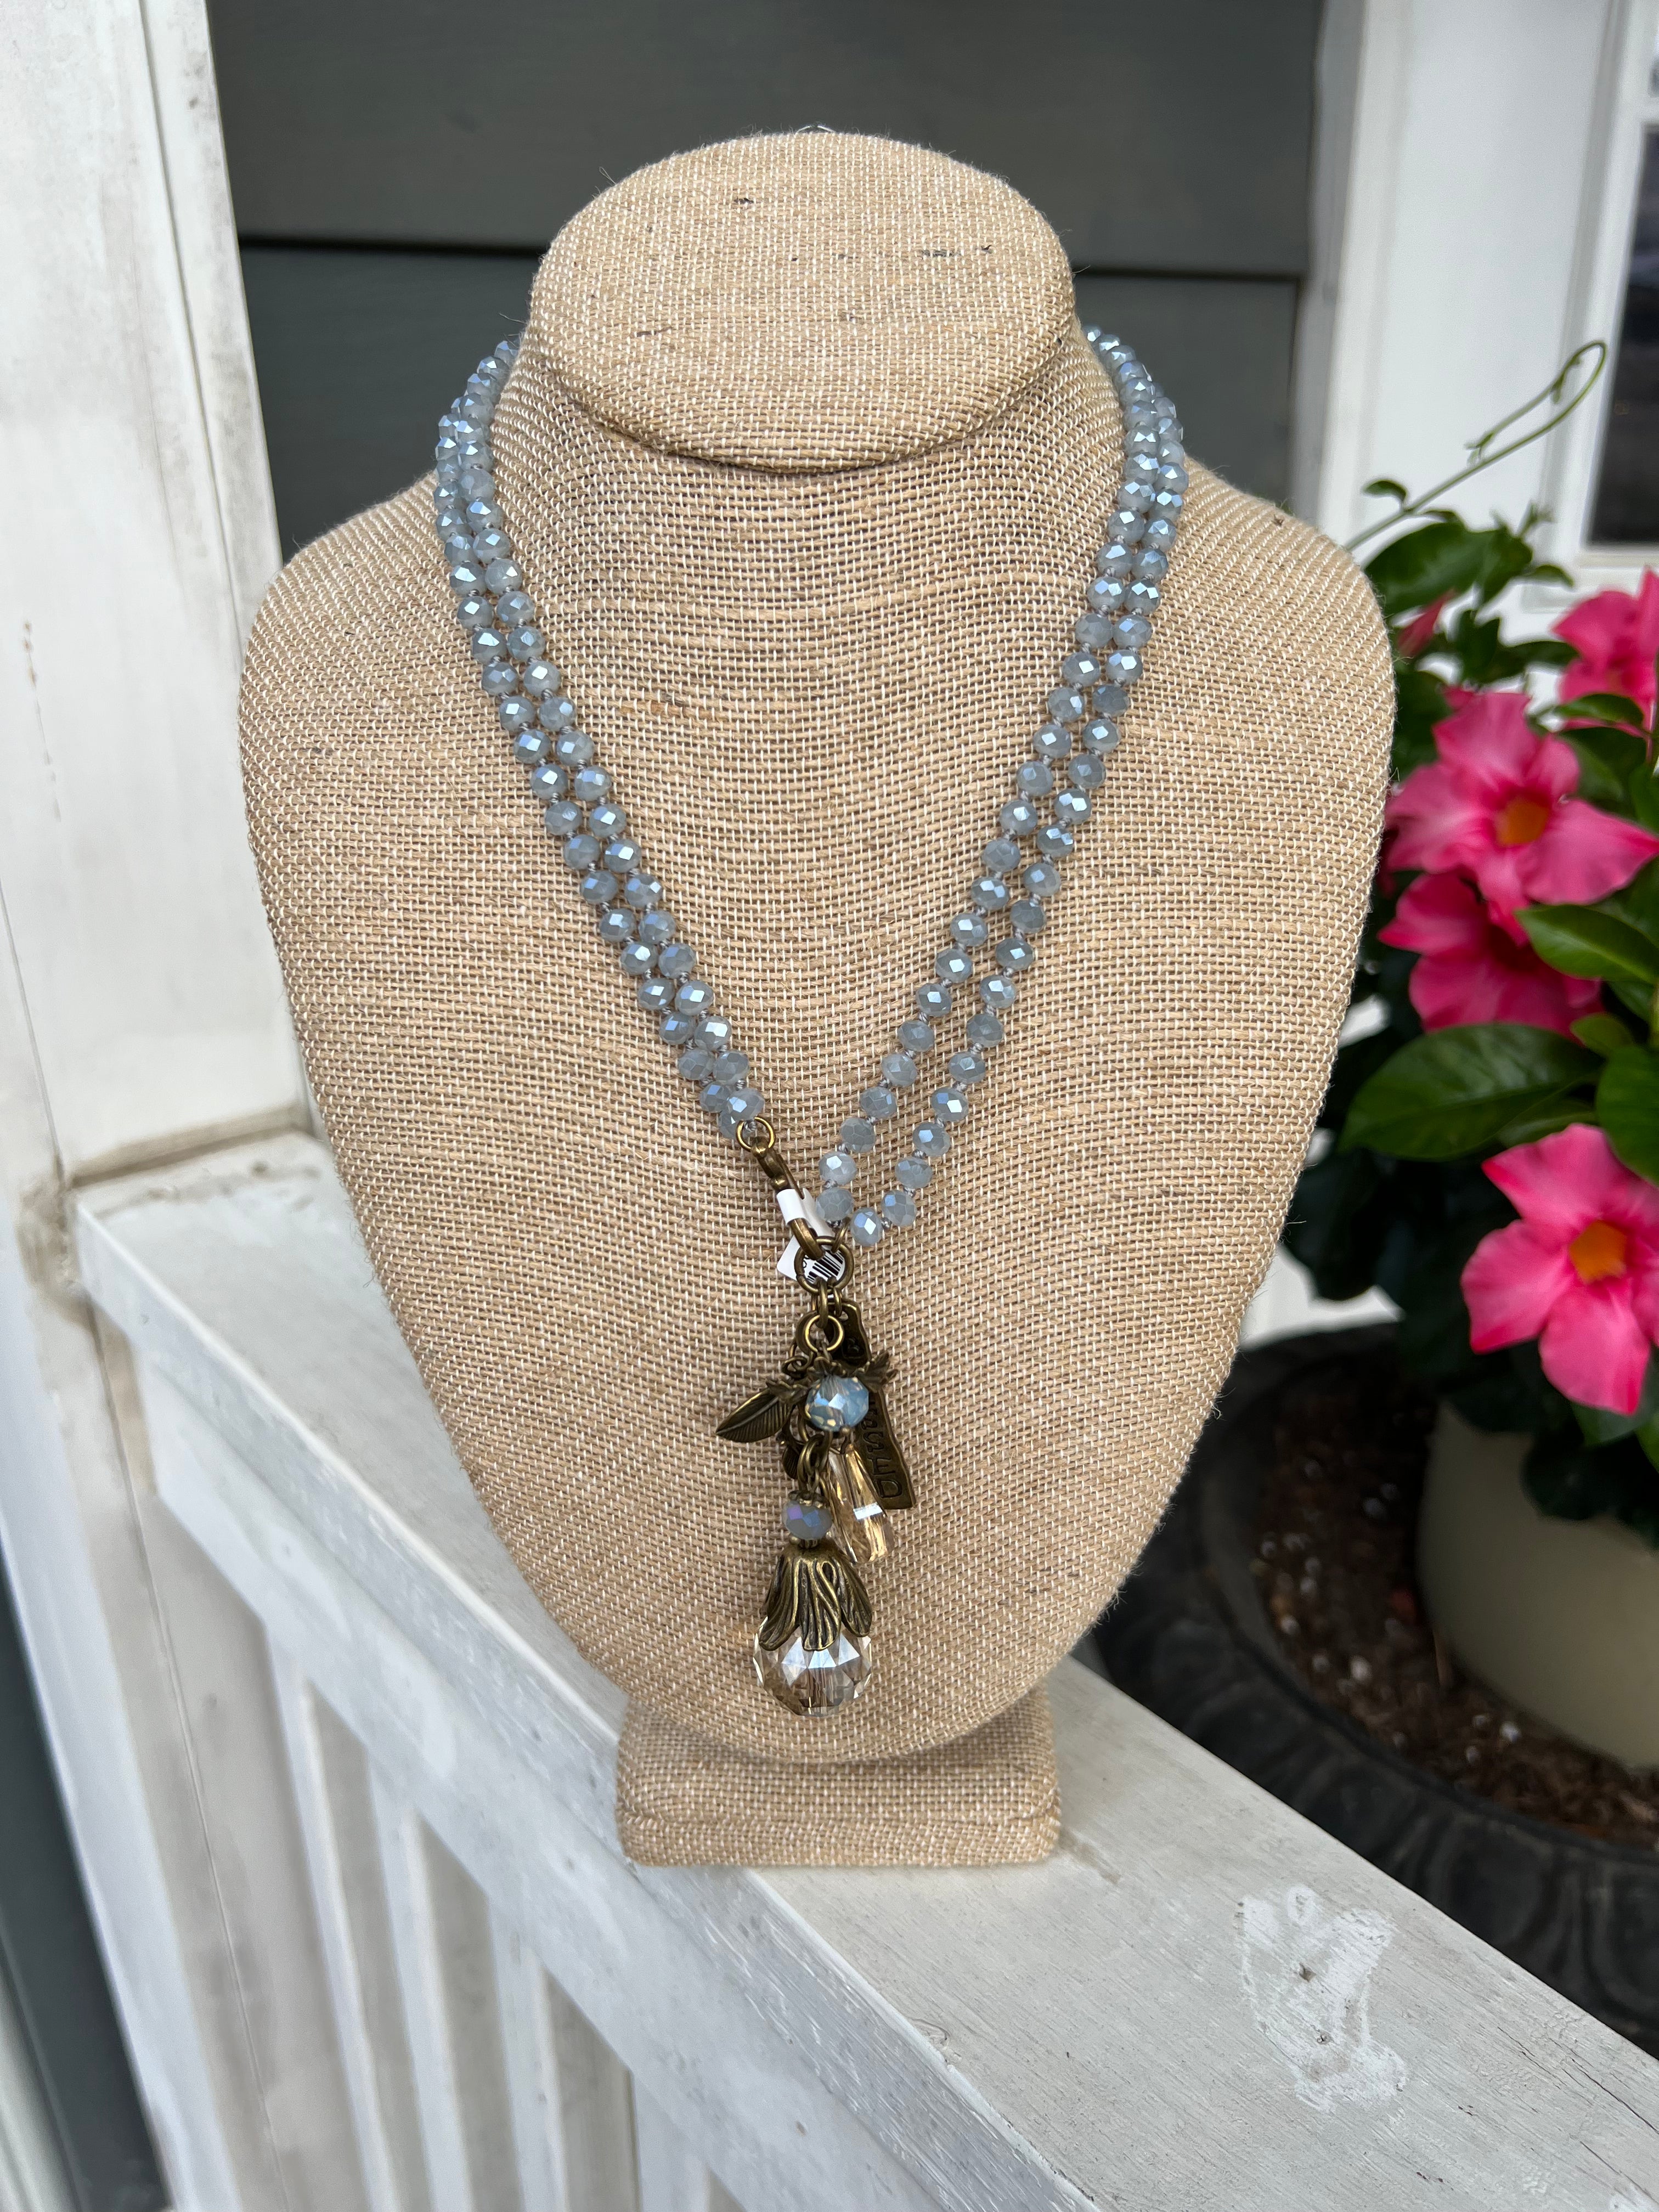 Beaded Necklace with Handmade Charms